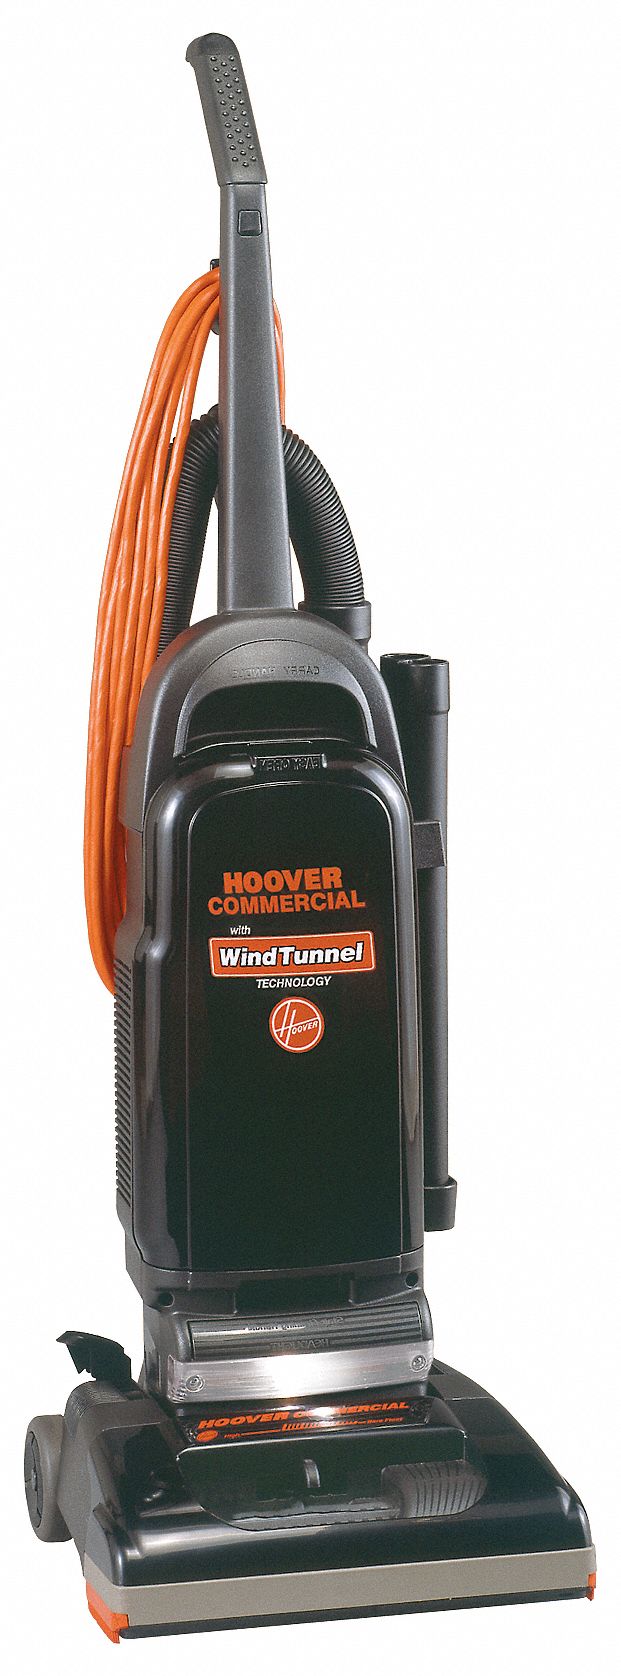 Hoover Commercial WindTunnel 13 Bagged Upright Vacuum C1703900 